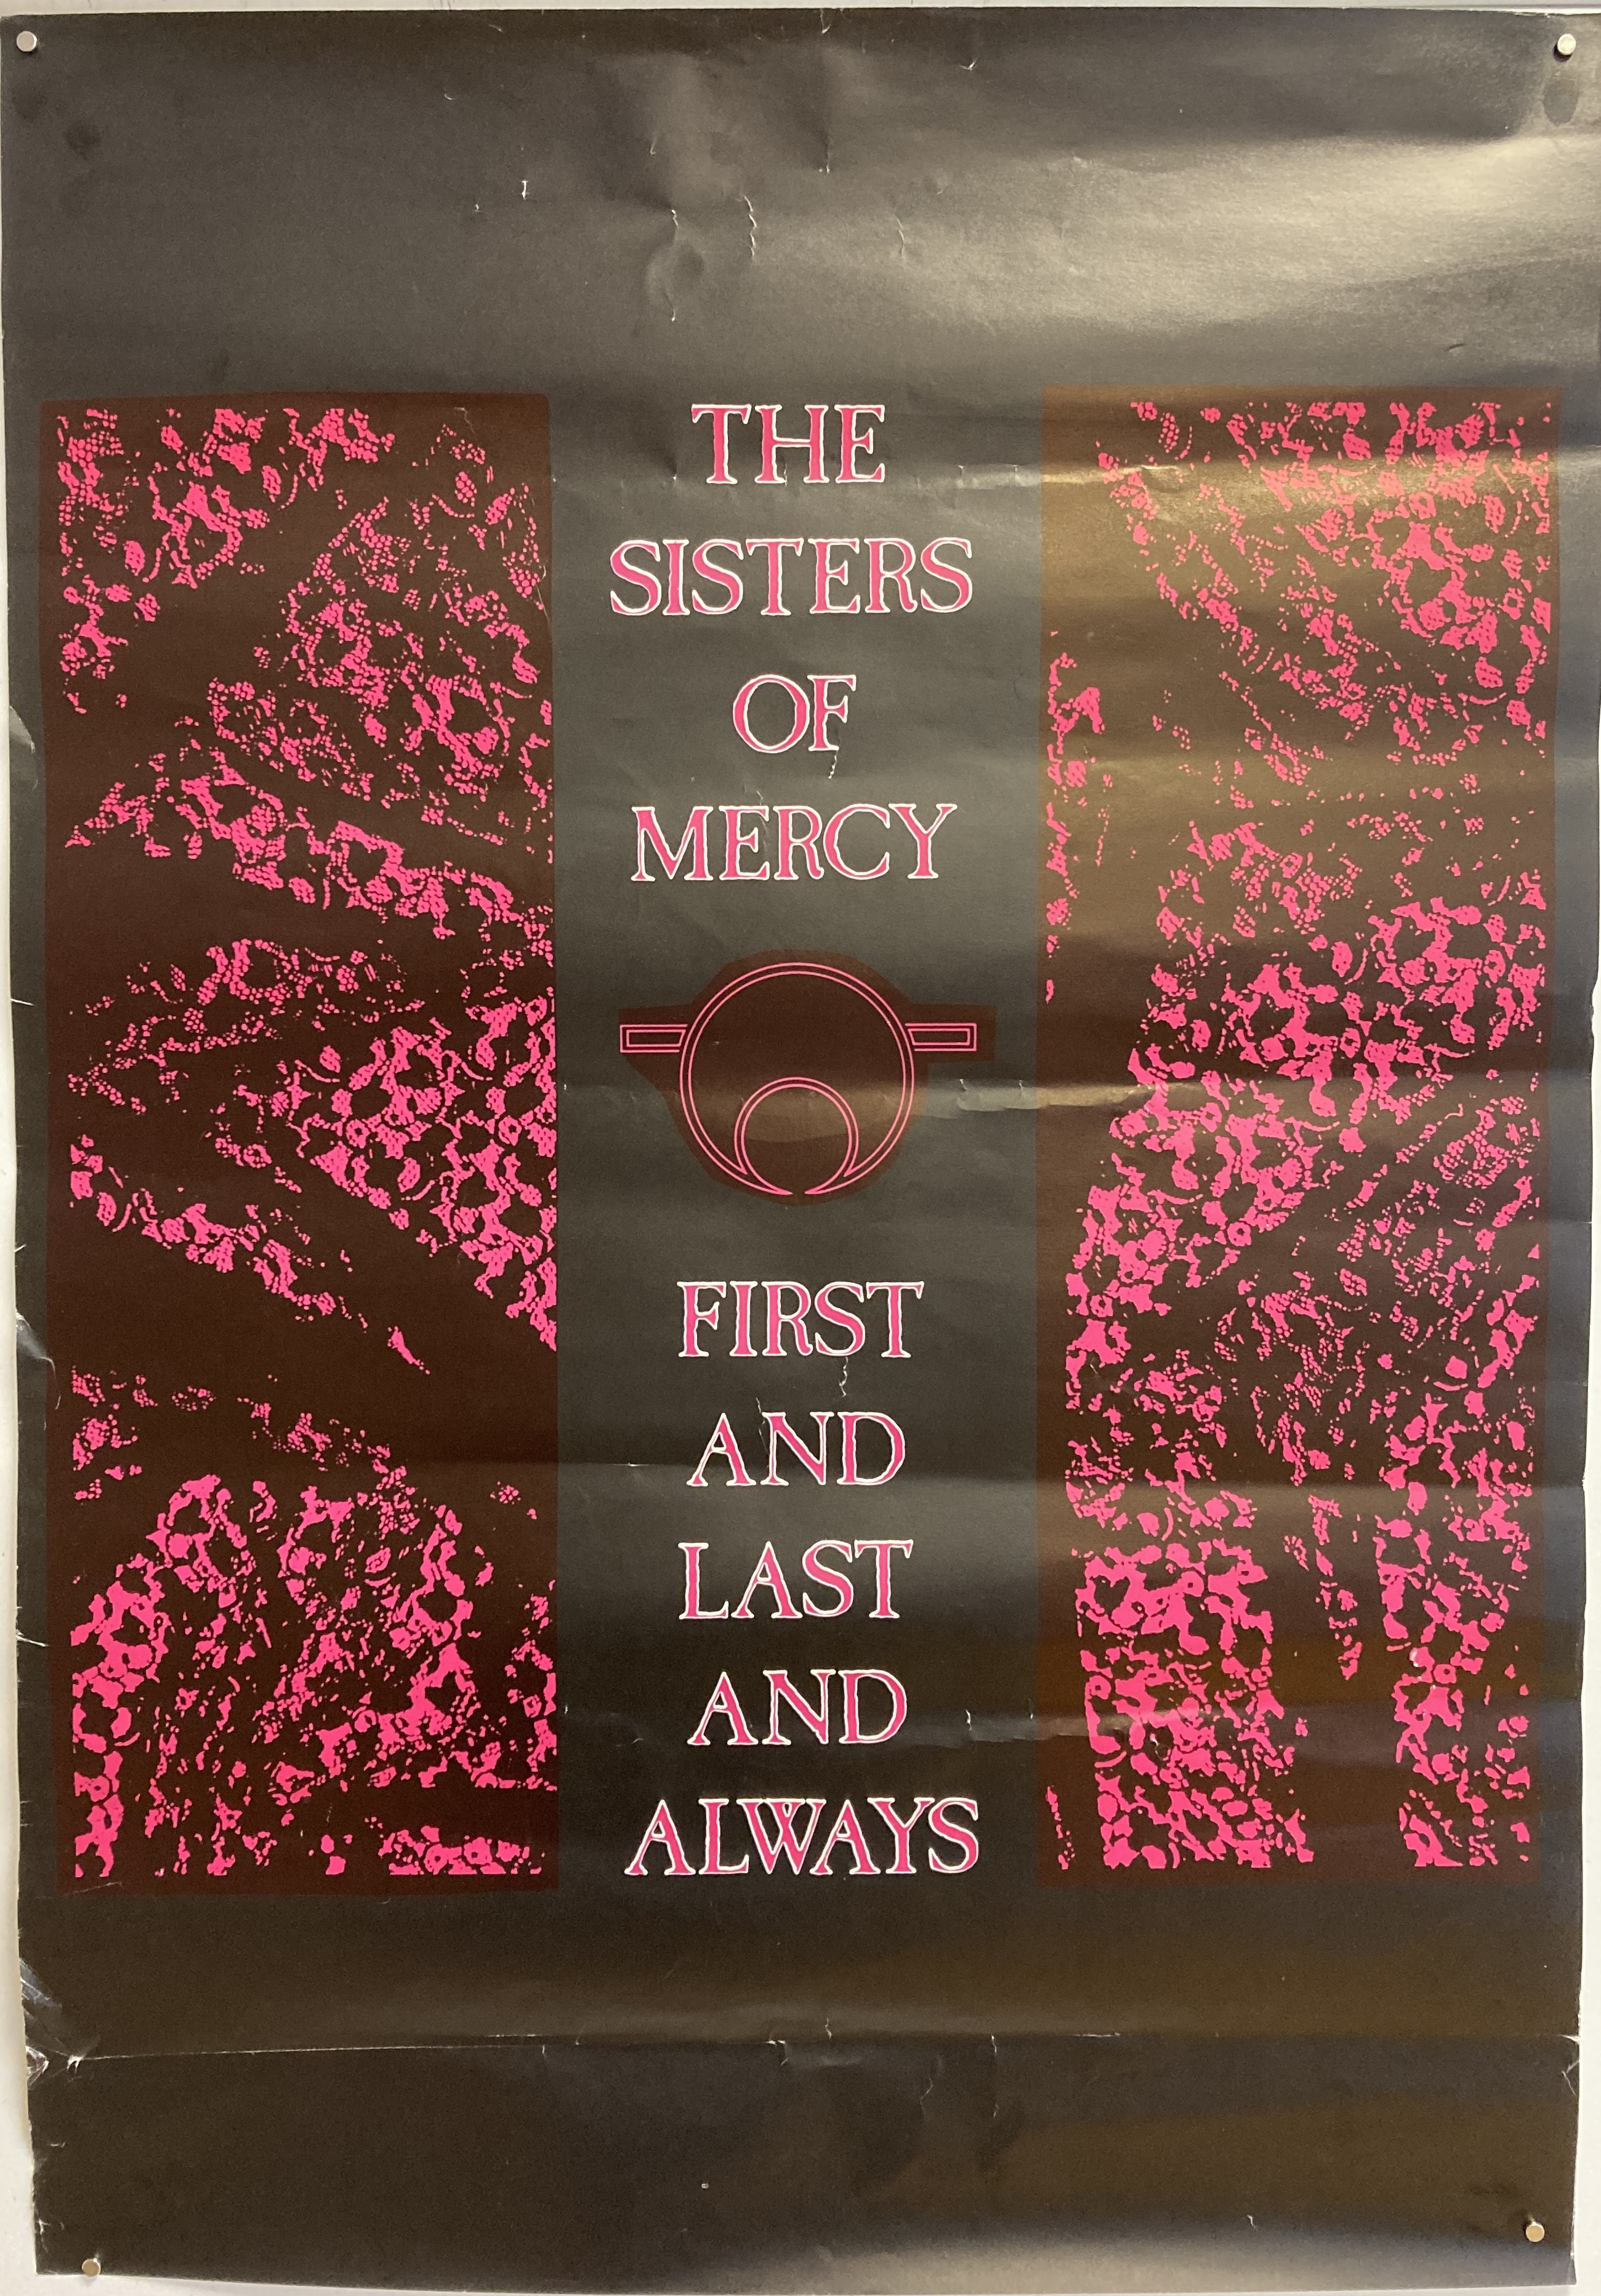 SISTERS OF MERCY POSTERS. Three Sisters of Mercy posters. - Image 4 of 4